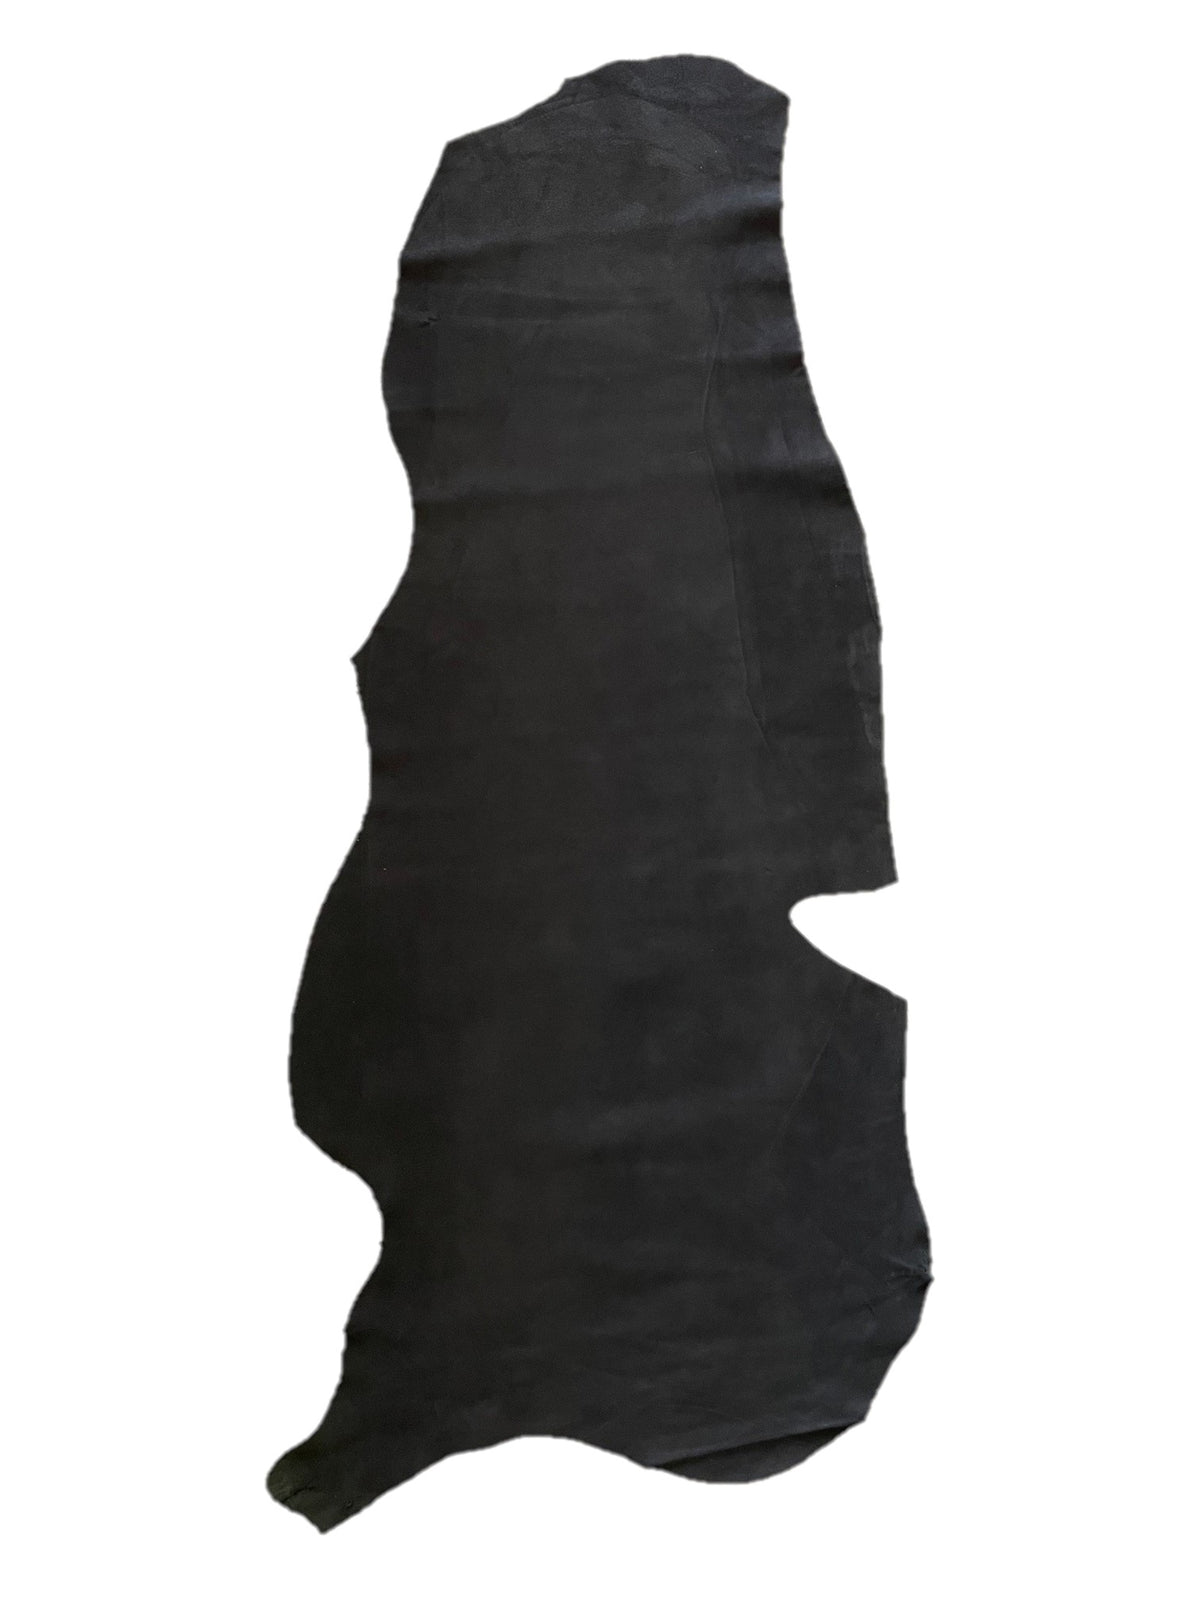 Suede Black Classic Cow Side | 1.9mm | 9 sq.ft | $40 ea.